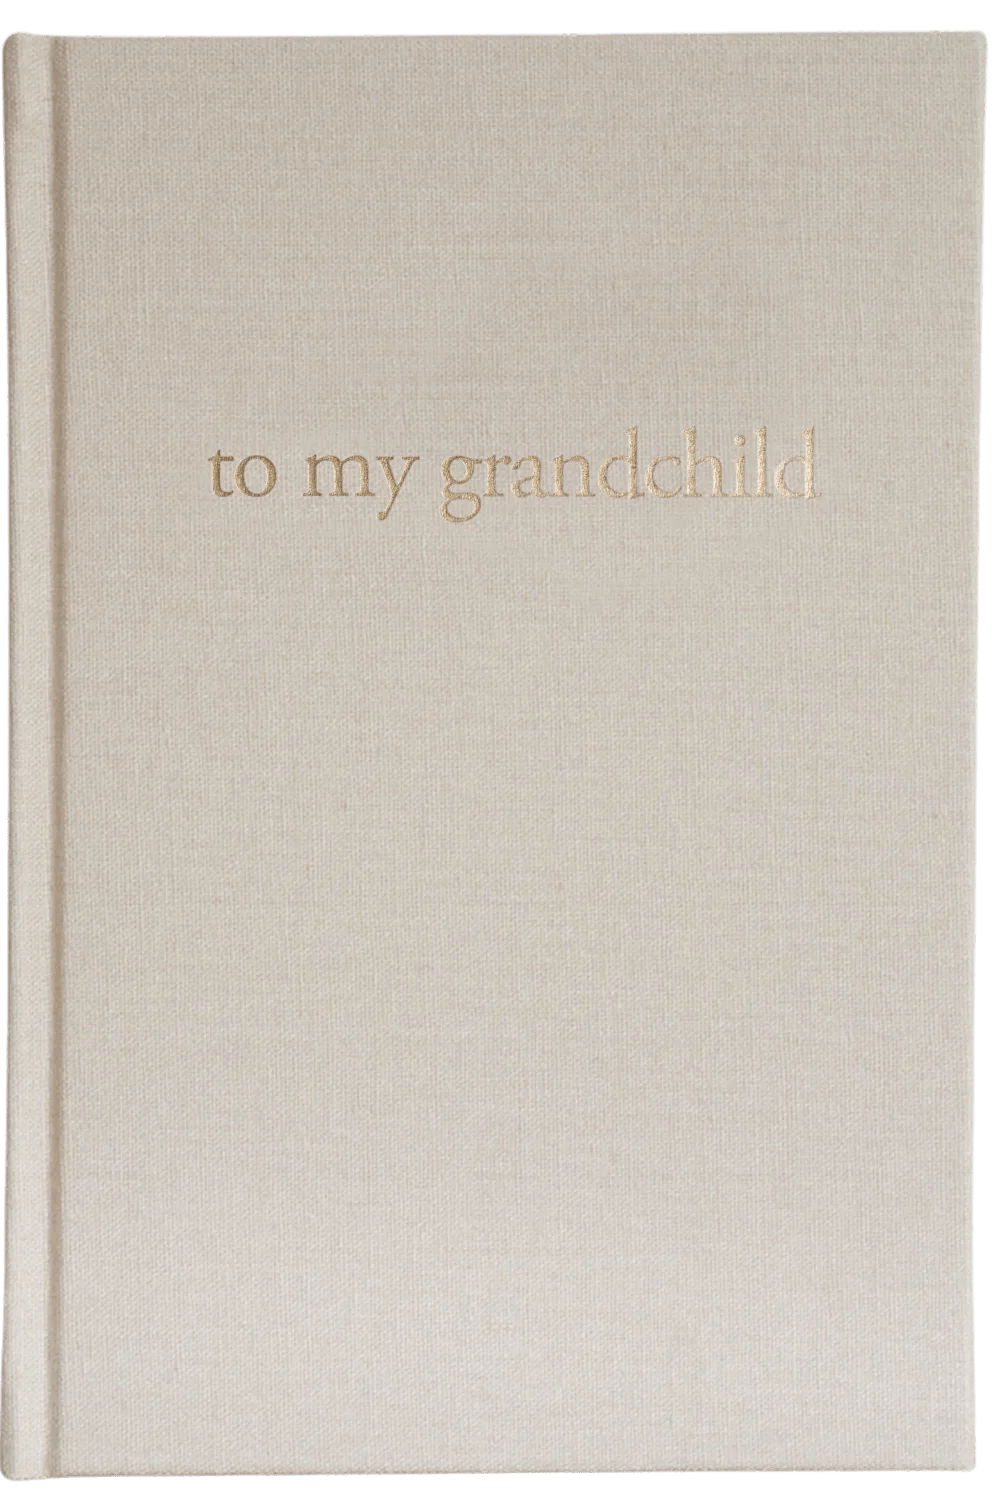 Forget Me Not Childrens Books Latte Grandparents Journal - To My Grandchild